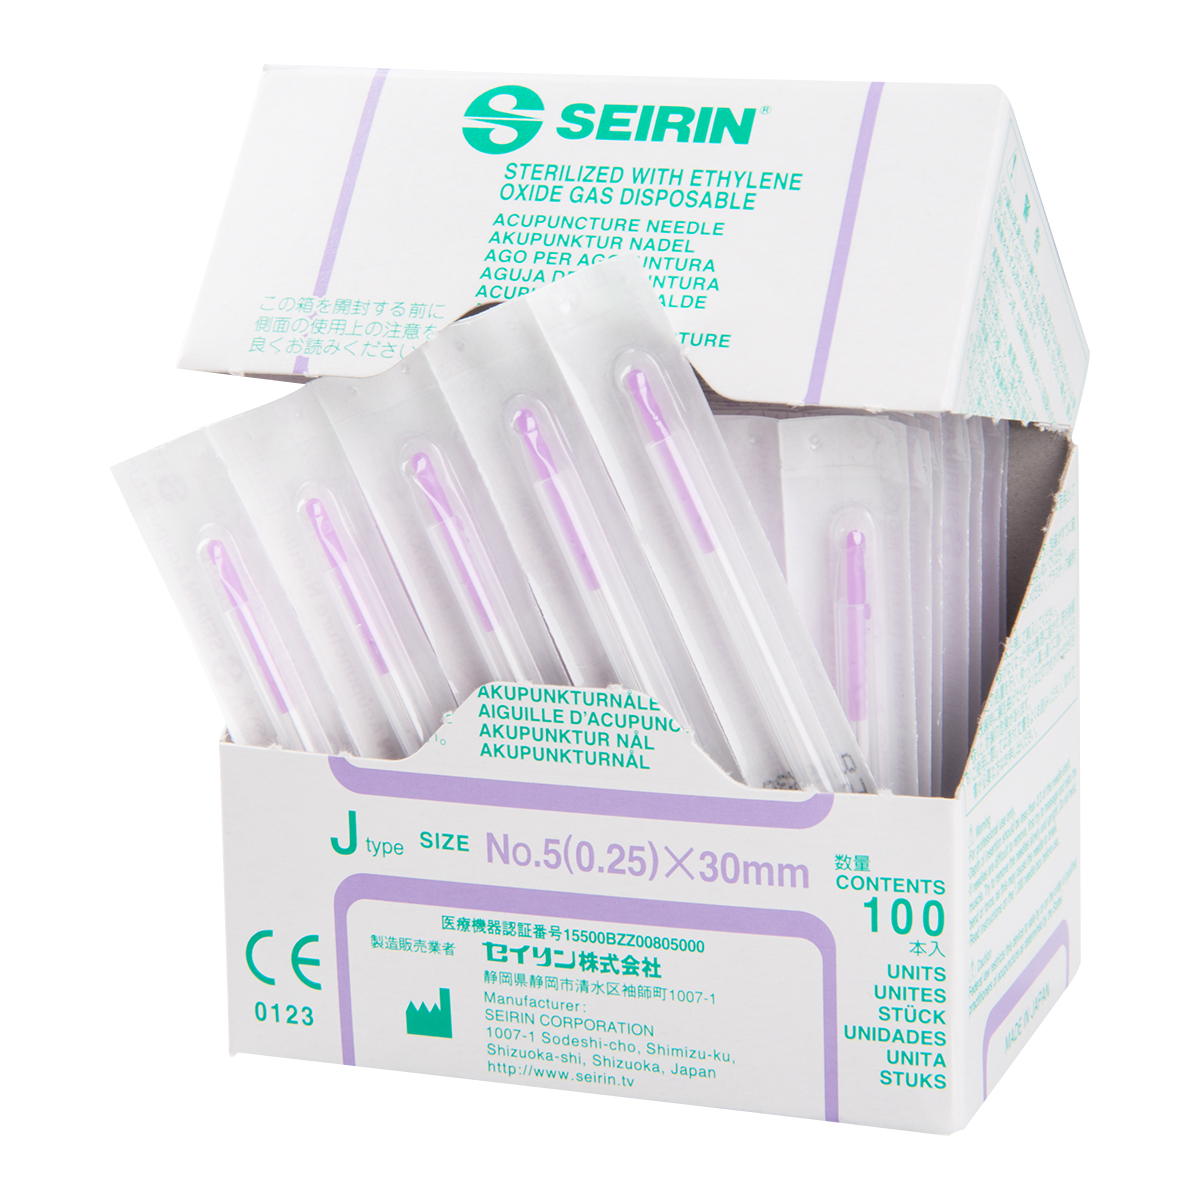 All SEIRIN Needles Are Tested to Stringent Safety Standards